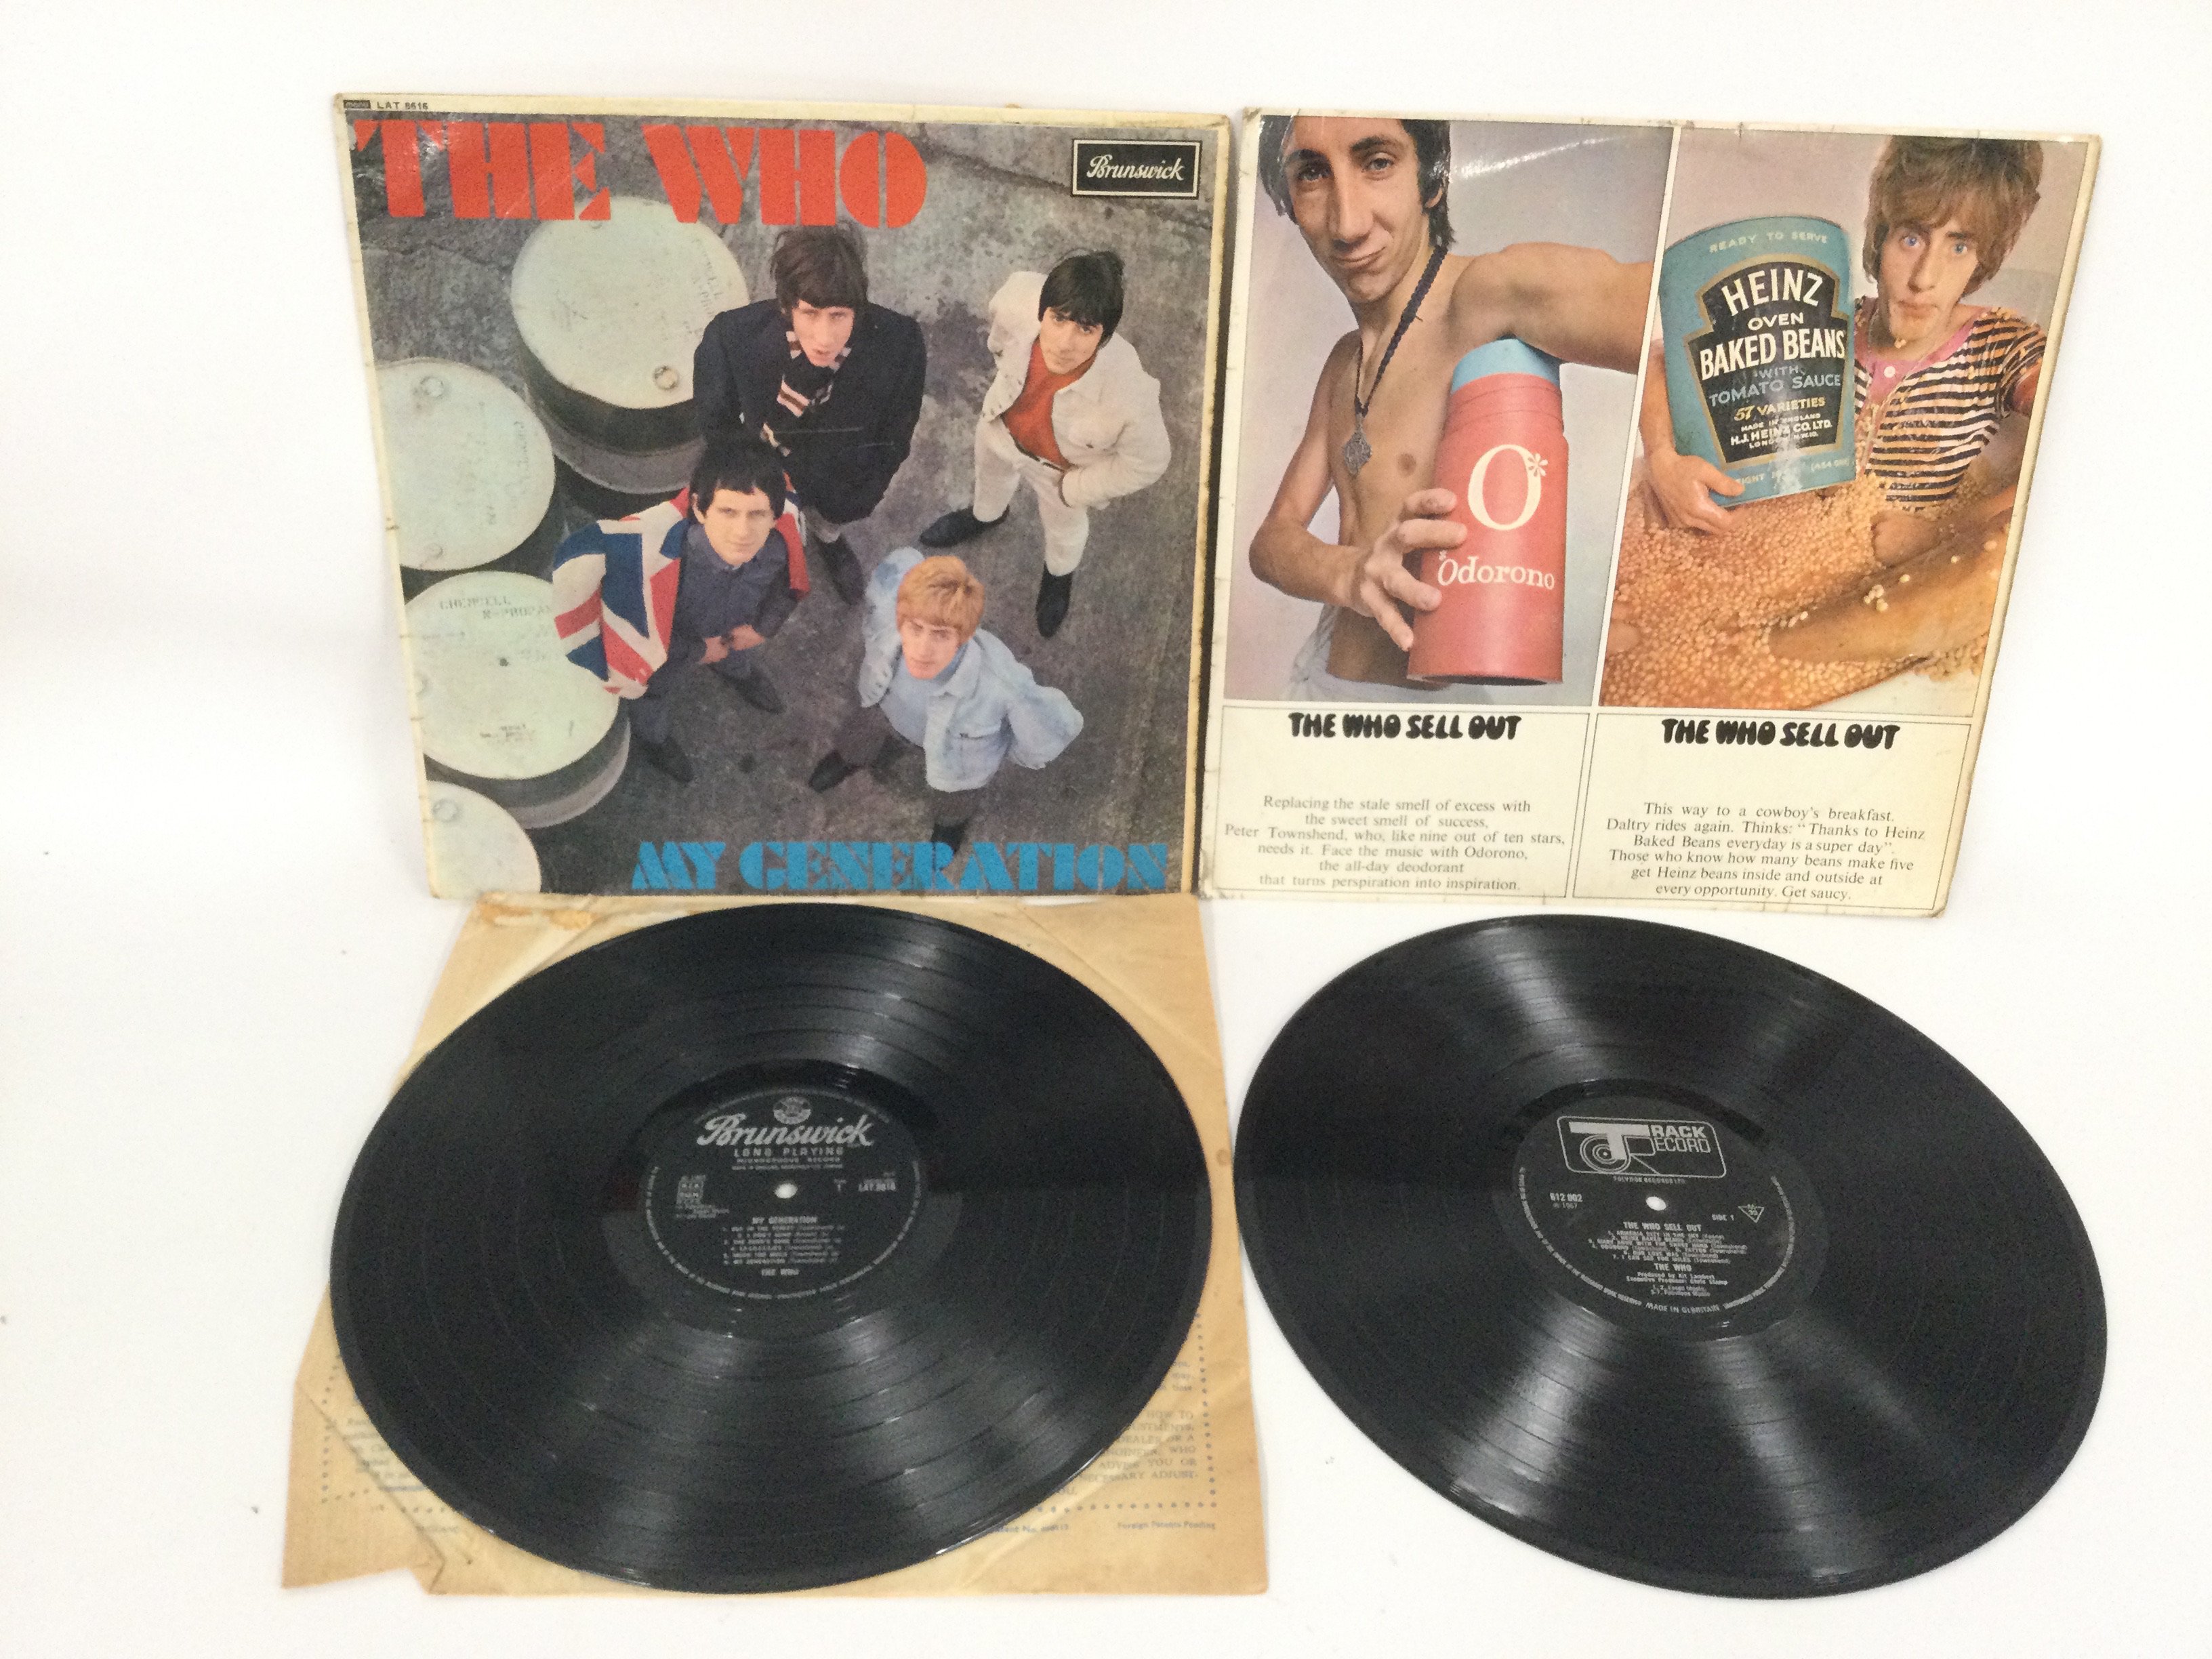 Two LPs by The Who comprising a first UK pressing